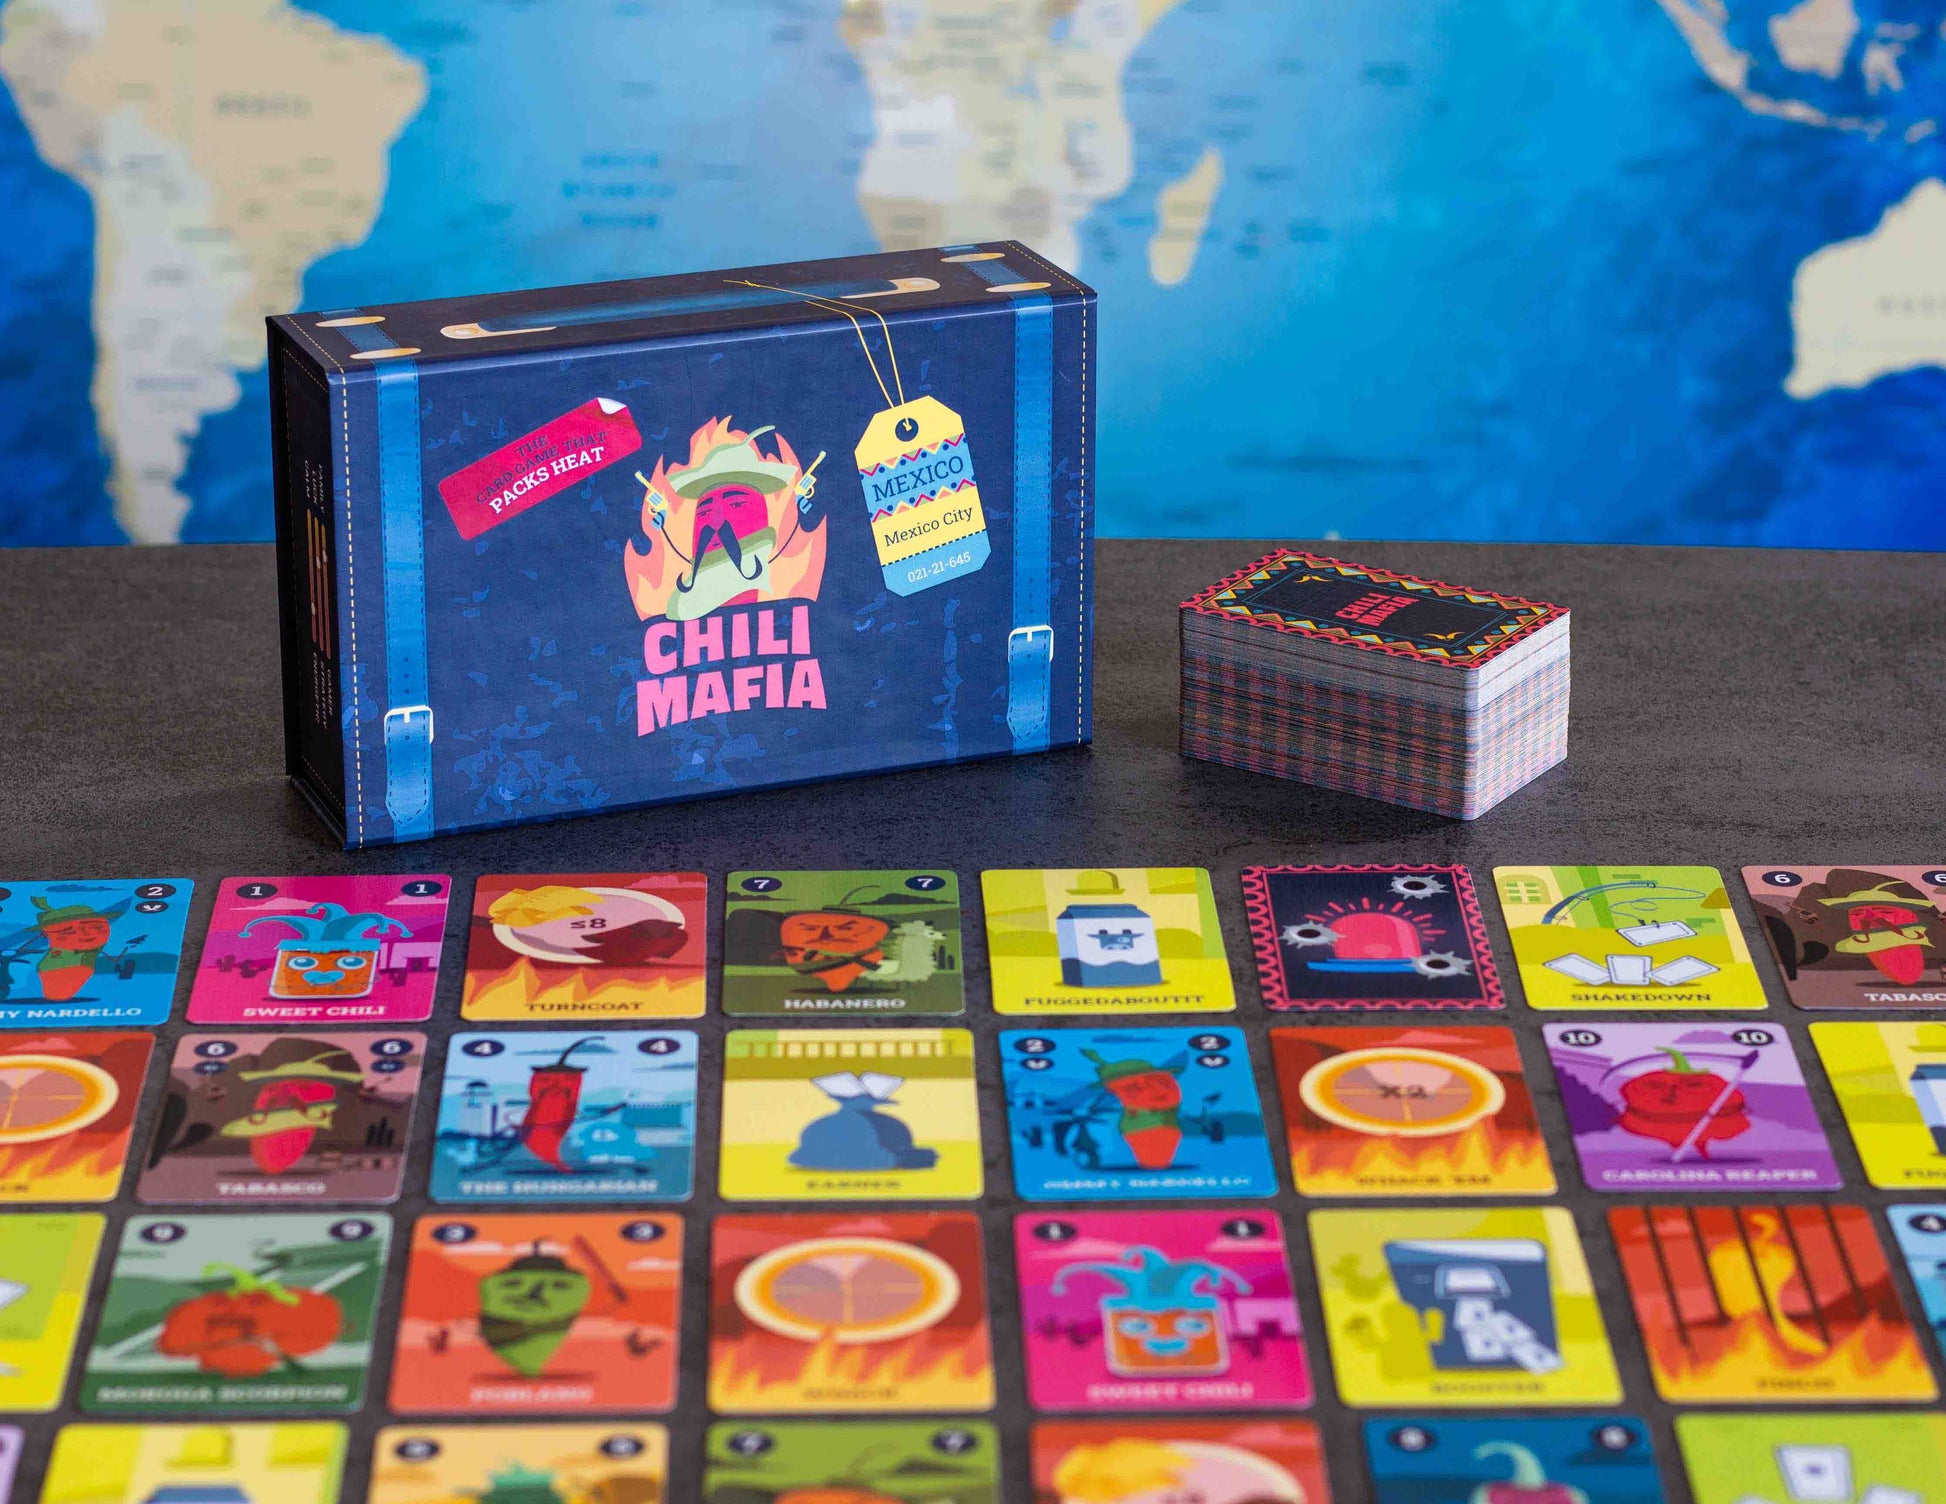 Chili Mafia box and cards. Add some spice to your next board game night with this set-collection card game for up to 8 people!